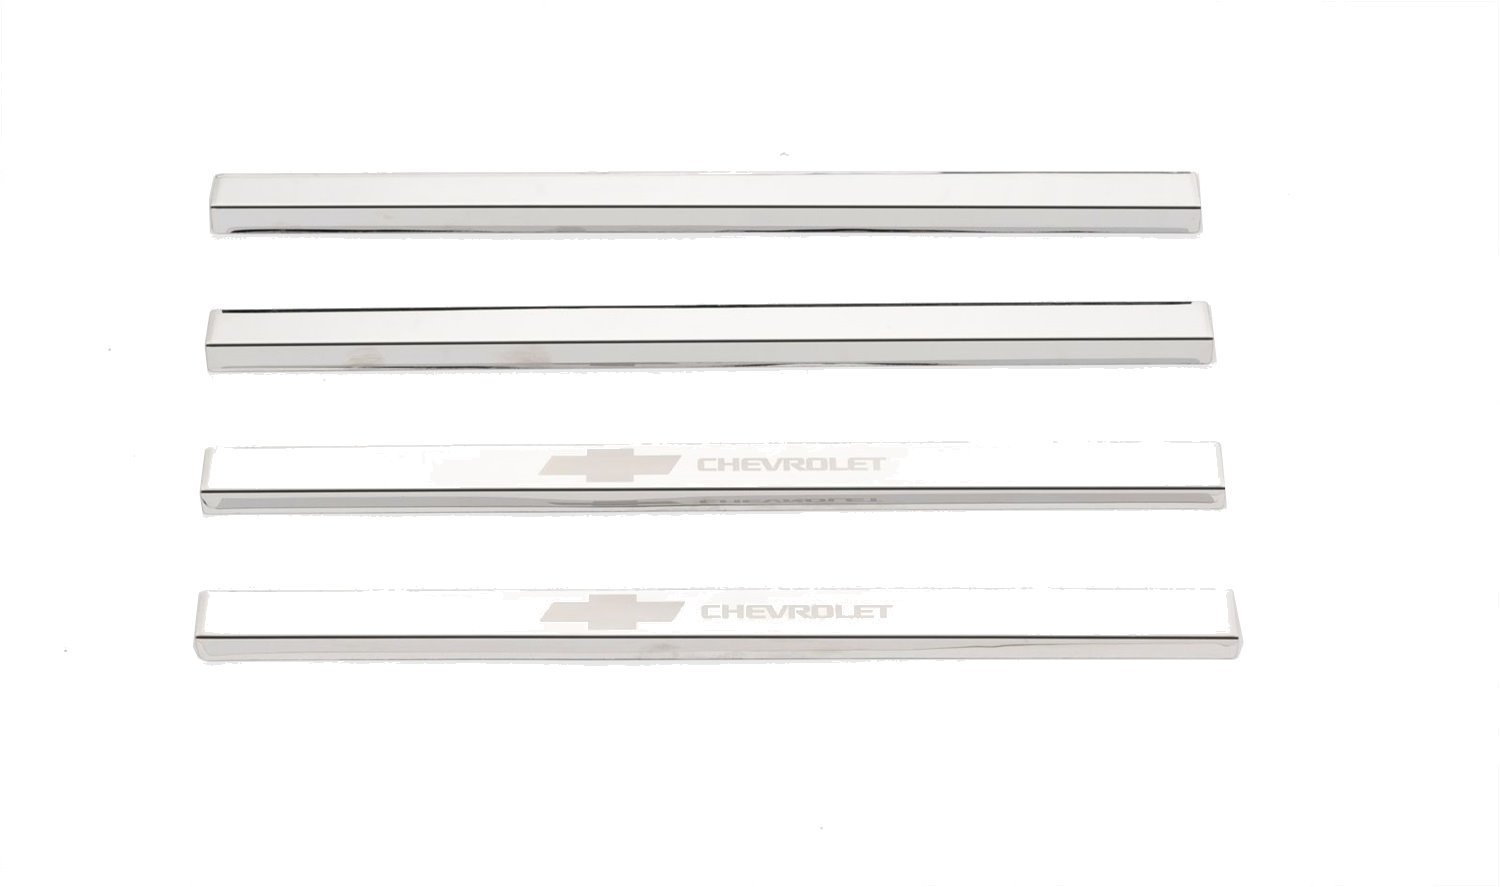 GM Licensed Products Door Sills Chevrolet Silverado LD-Regular Cab with Chevrolet Etching 4 Pcs